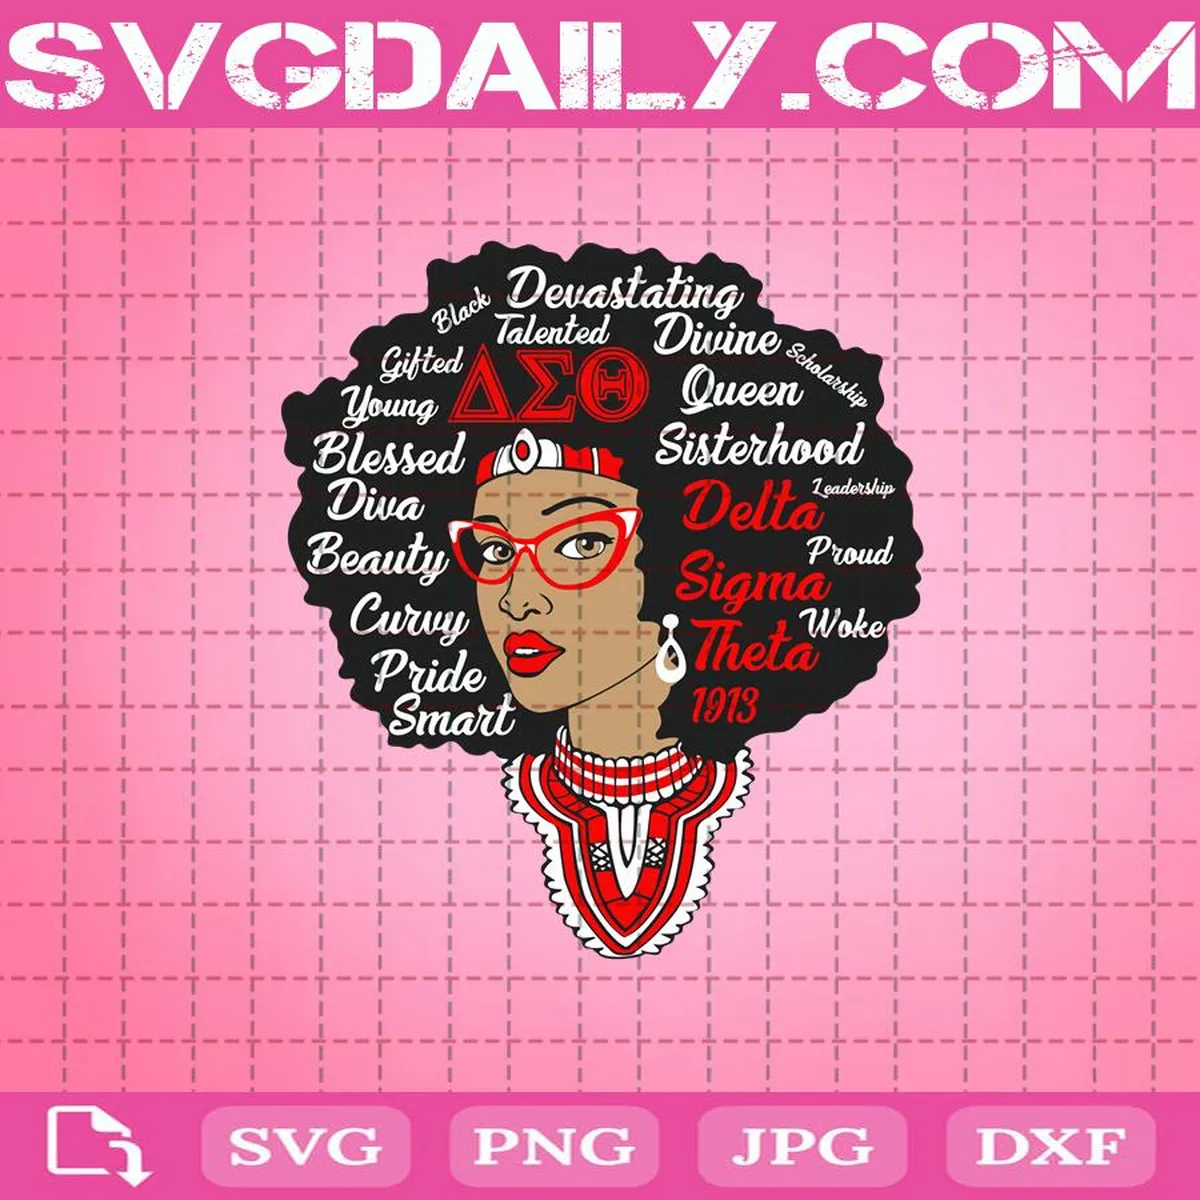 Delta Queen Delta Sorority Svg, Black Hair Svg, African American Svg, Afro Woman Svg, Afro Girl Svg Png Dxf Cutting Files Silhouette Cricut